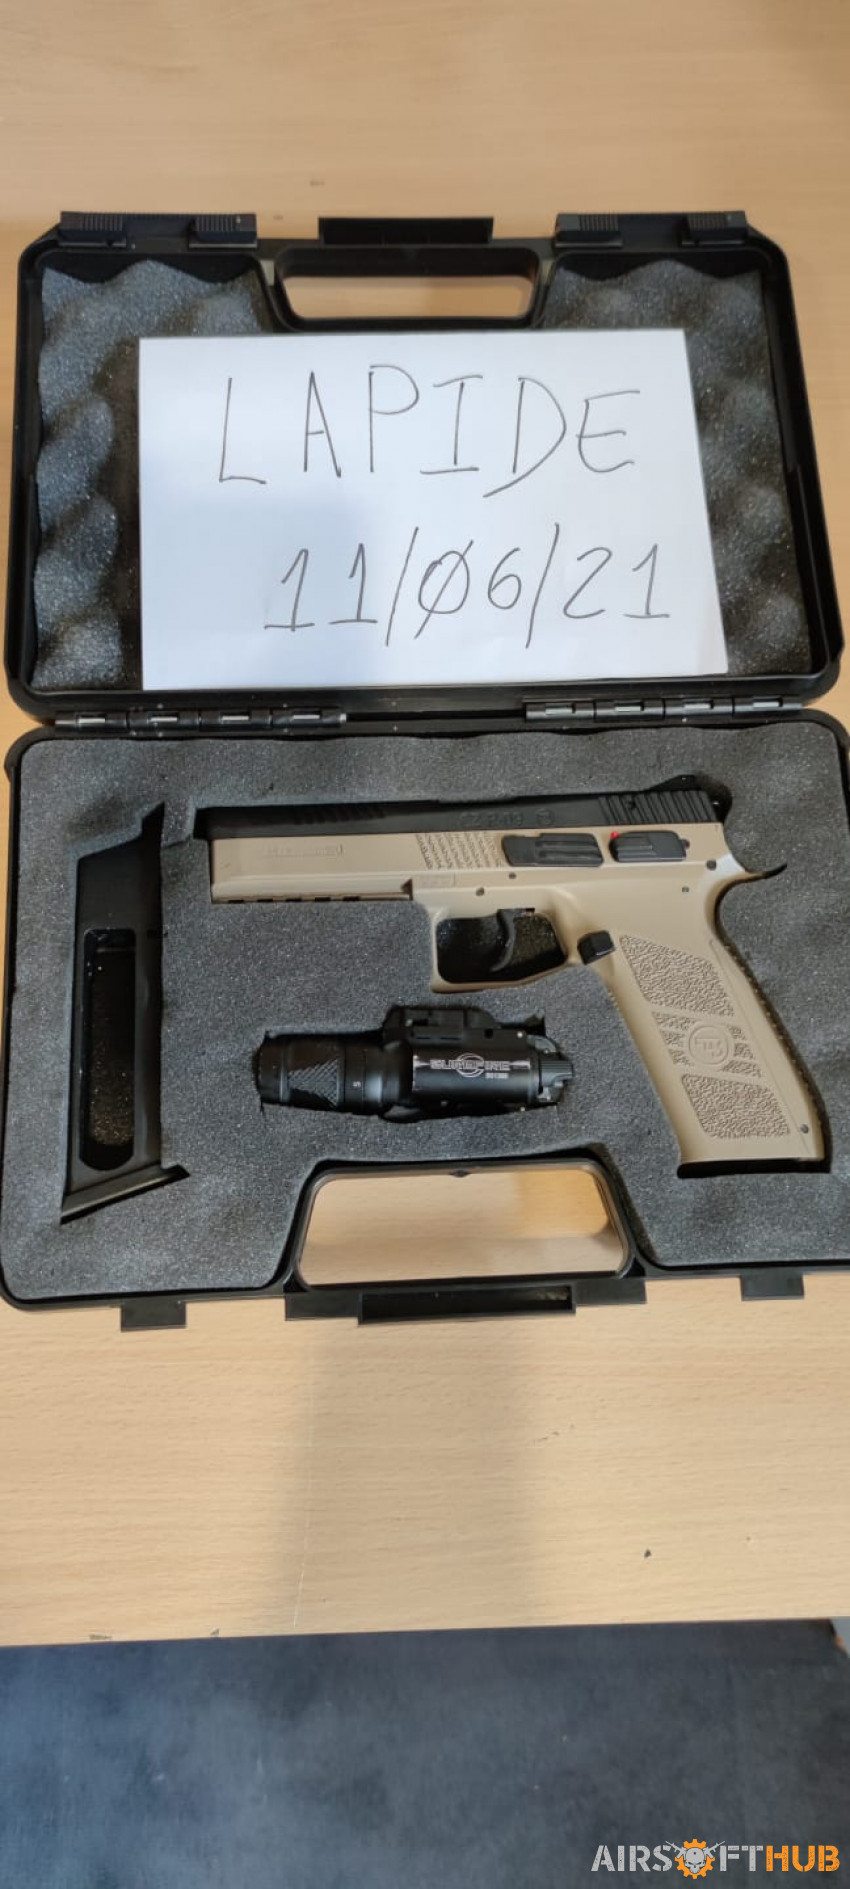 ASG CZ P-09 Gas Blowback - Used airsoft equipment